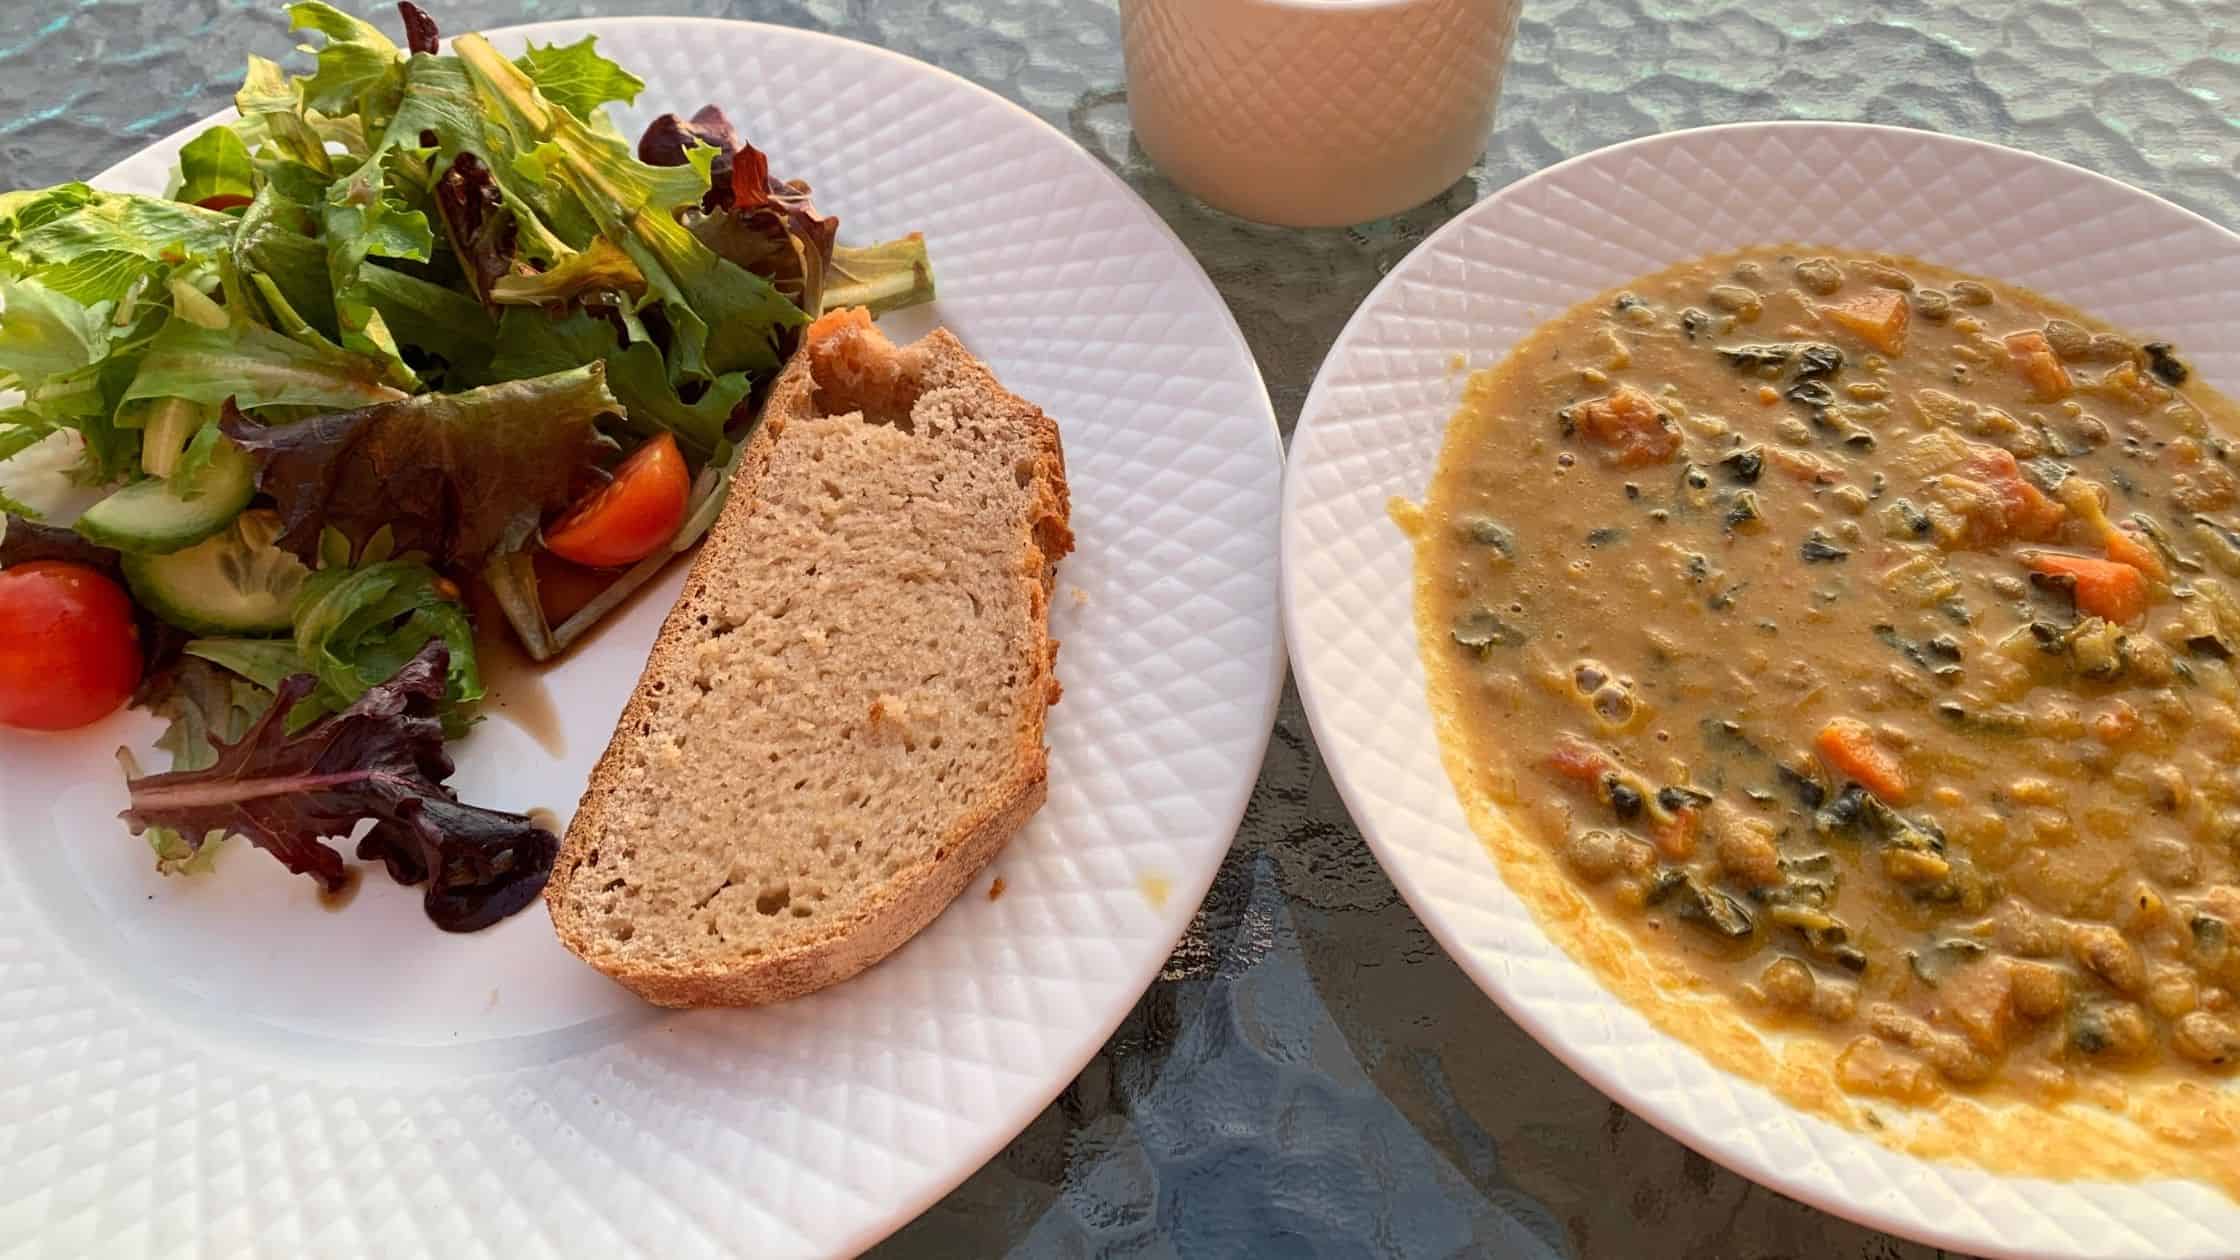 A plate of salad and homemade bread beside a delicious soup - all made with fresh ingredients from the garden on the Sunshine Coast